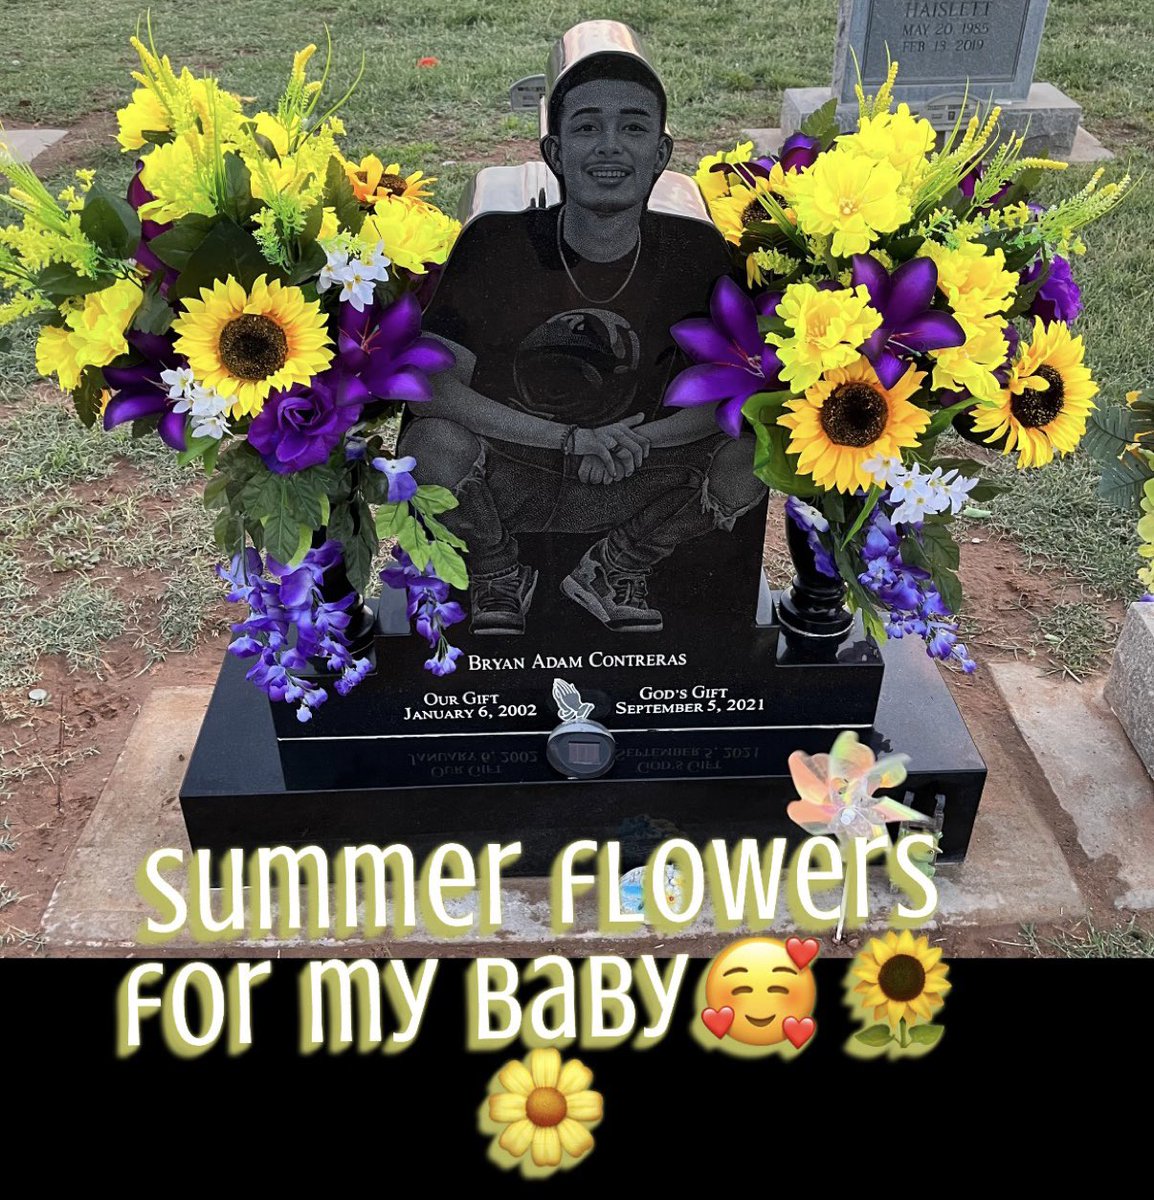 Summer Flowers for my Baby Bryan😇💛🌼🌻 Mama loves & misses you so much 😔💔🙏🏼
#missingyoualways
#myangelinheaven
#mamalovesyou
#missyoursmile